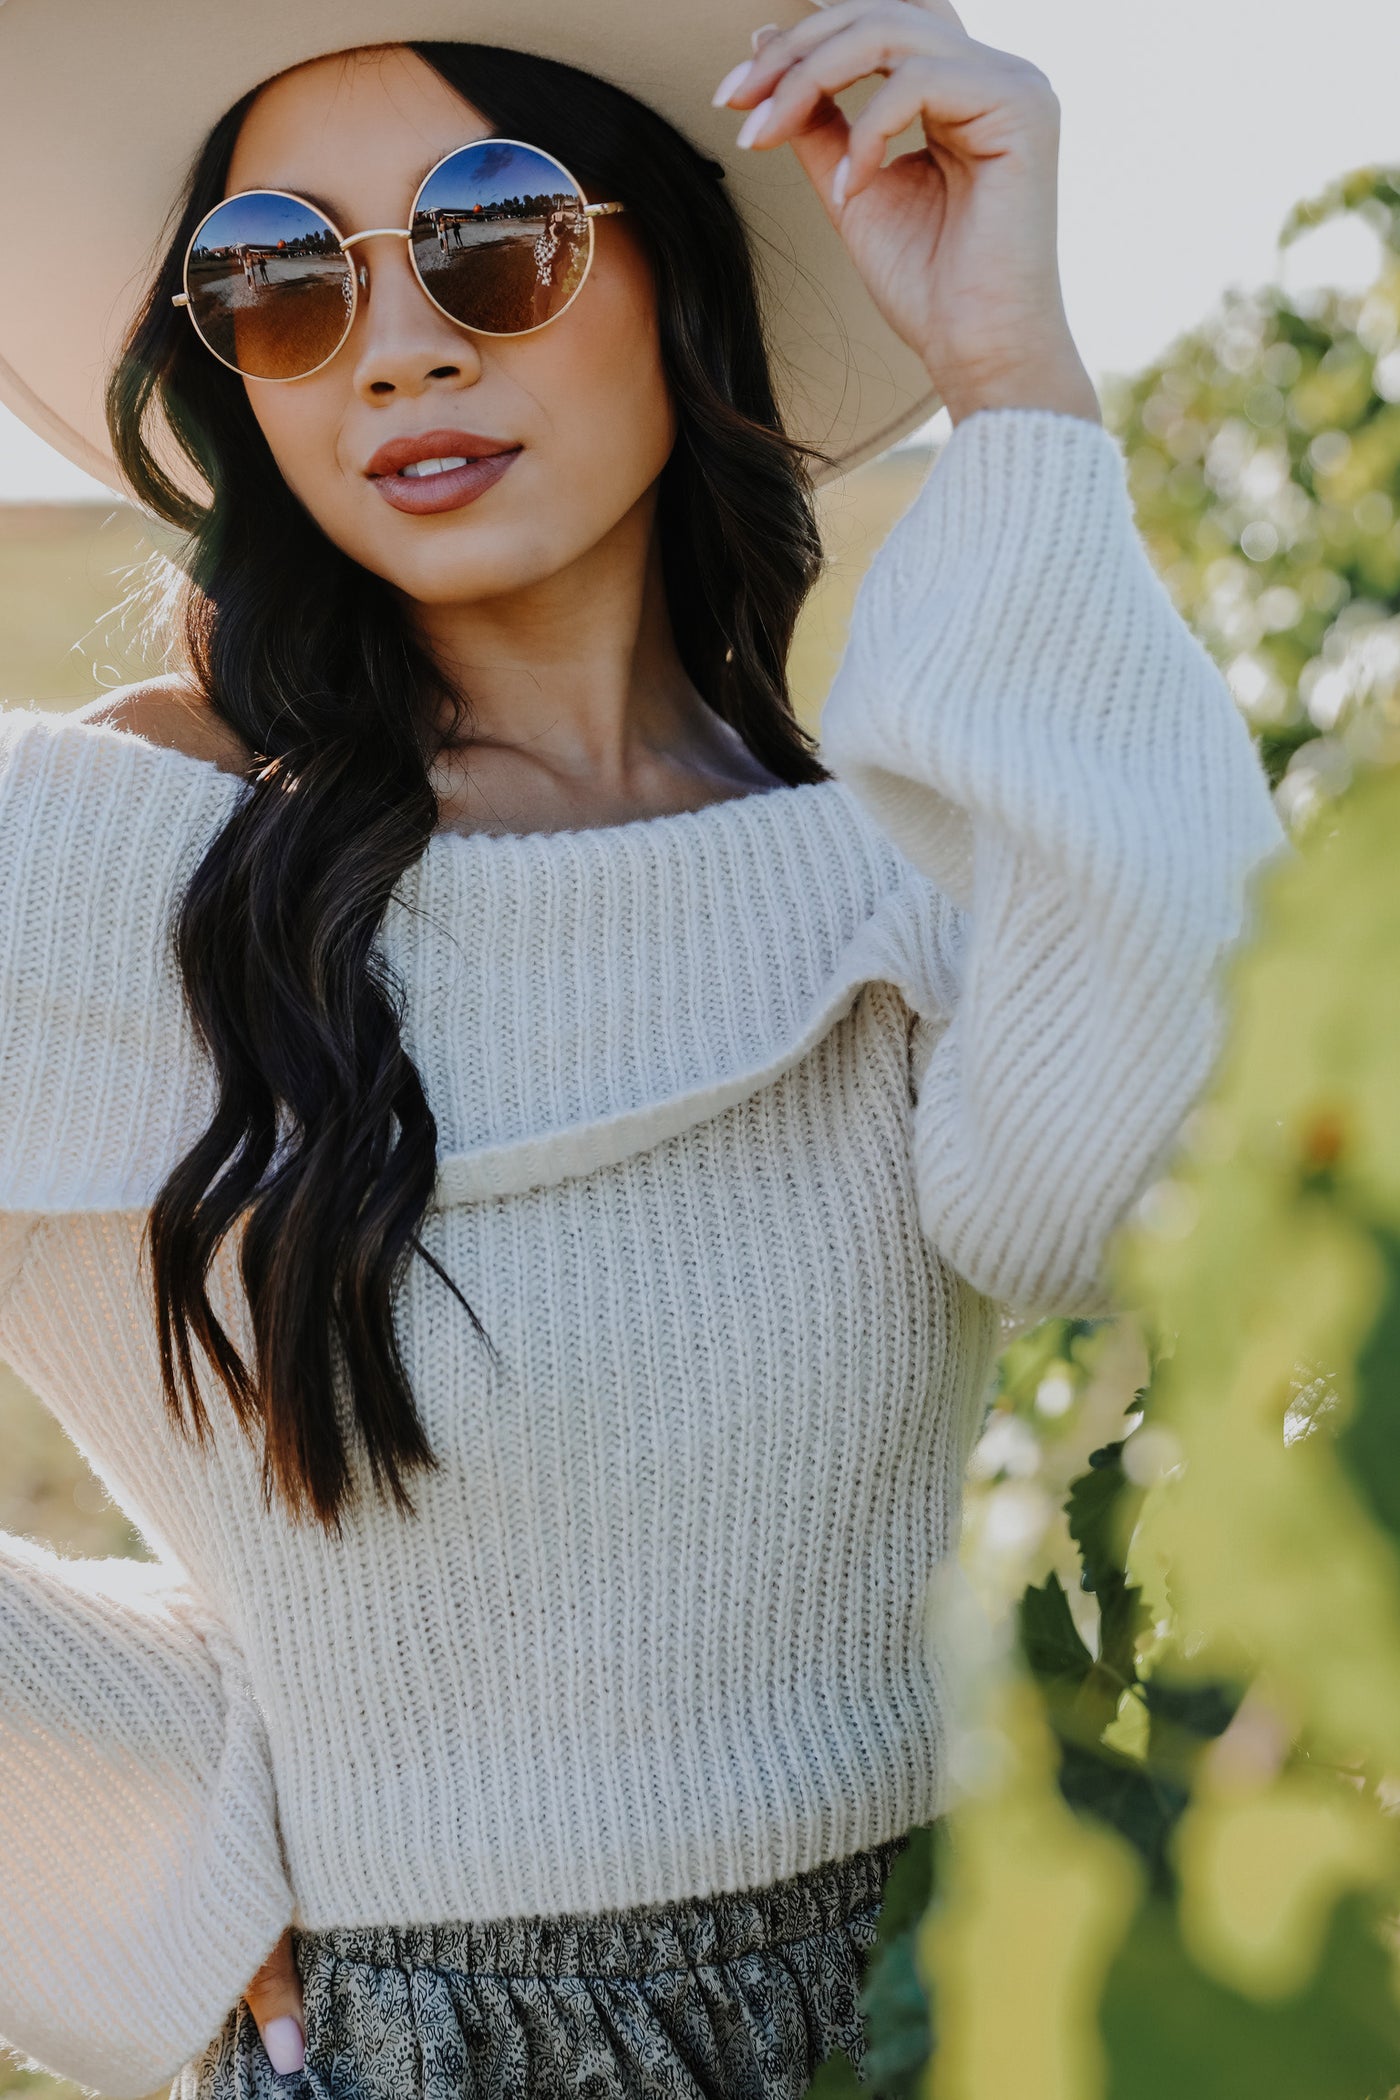 Off-The-Shoulder Sweater